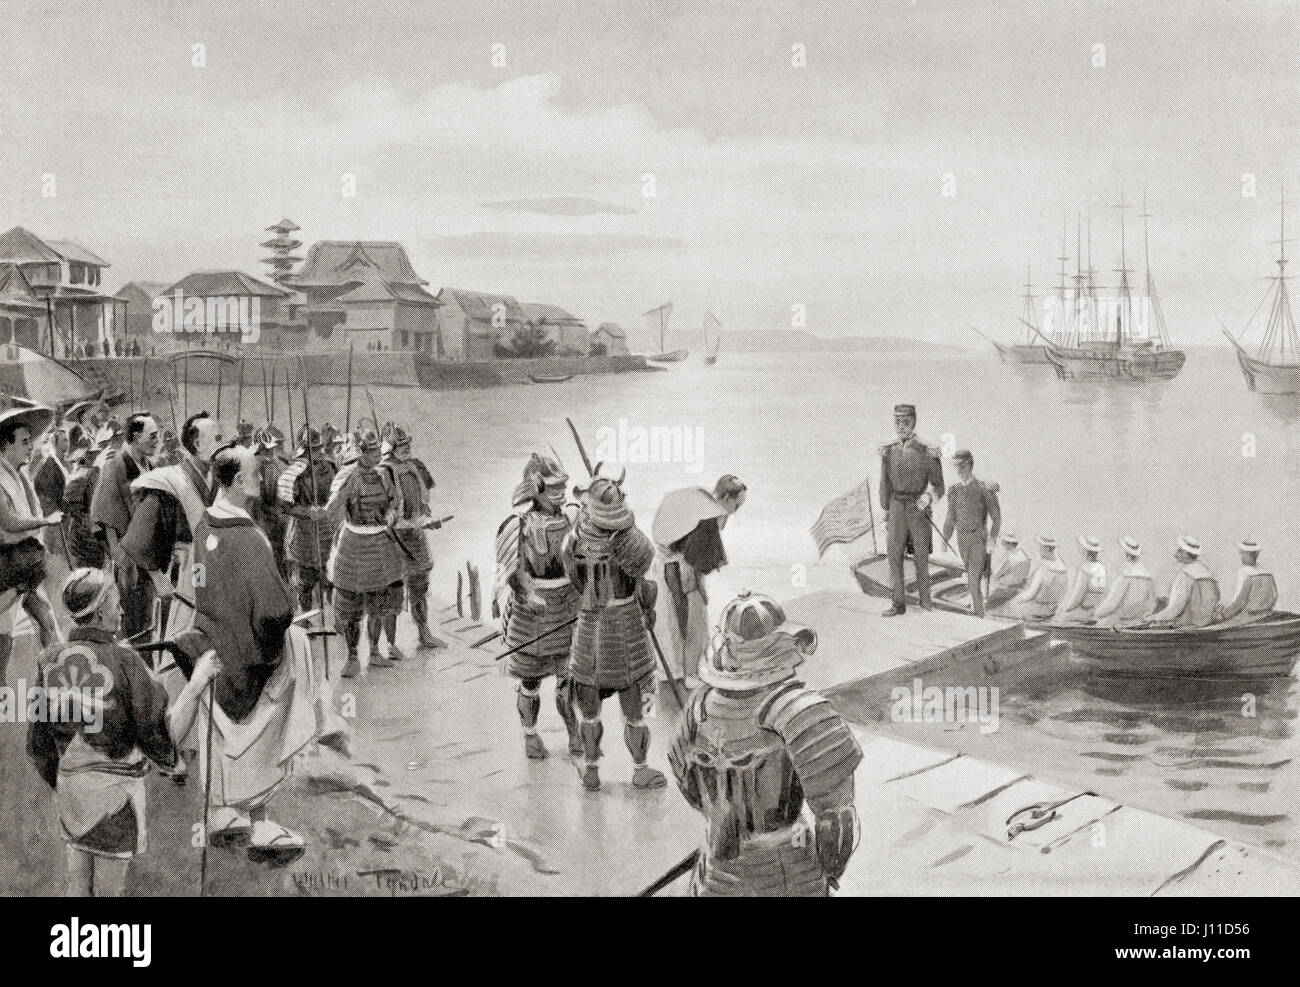 The landing of Admiral Perry in Tokio Harbour, Japan, July 8th, 1853.  Matthew Calbraith Perry, 1794 – 1858.  Commodore of the United States Navy who played a leading role in the opening of Japan to the West with the Convention of Kanagawa in 1854.  From Hutchinson's History of the Nations, published 1915 Stock Photo